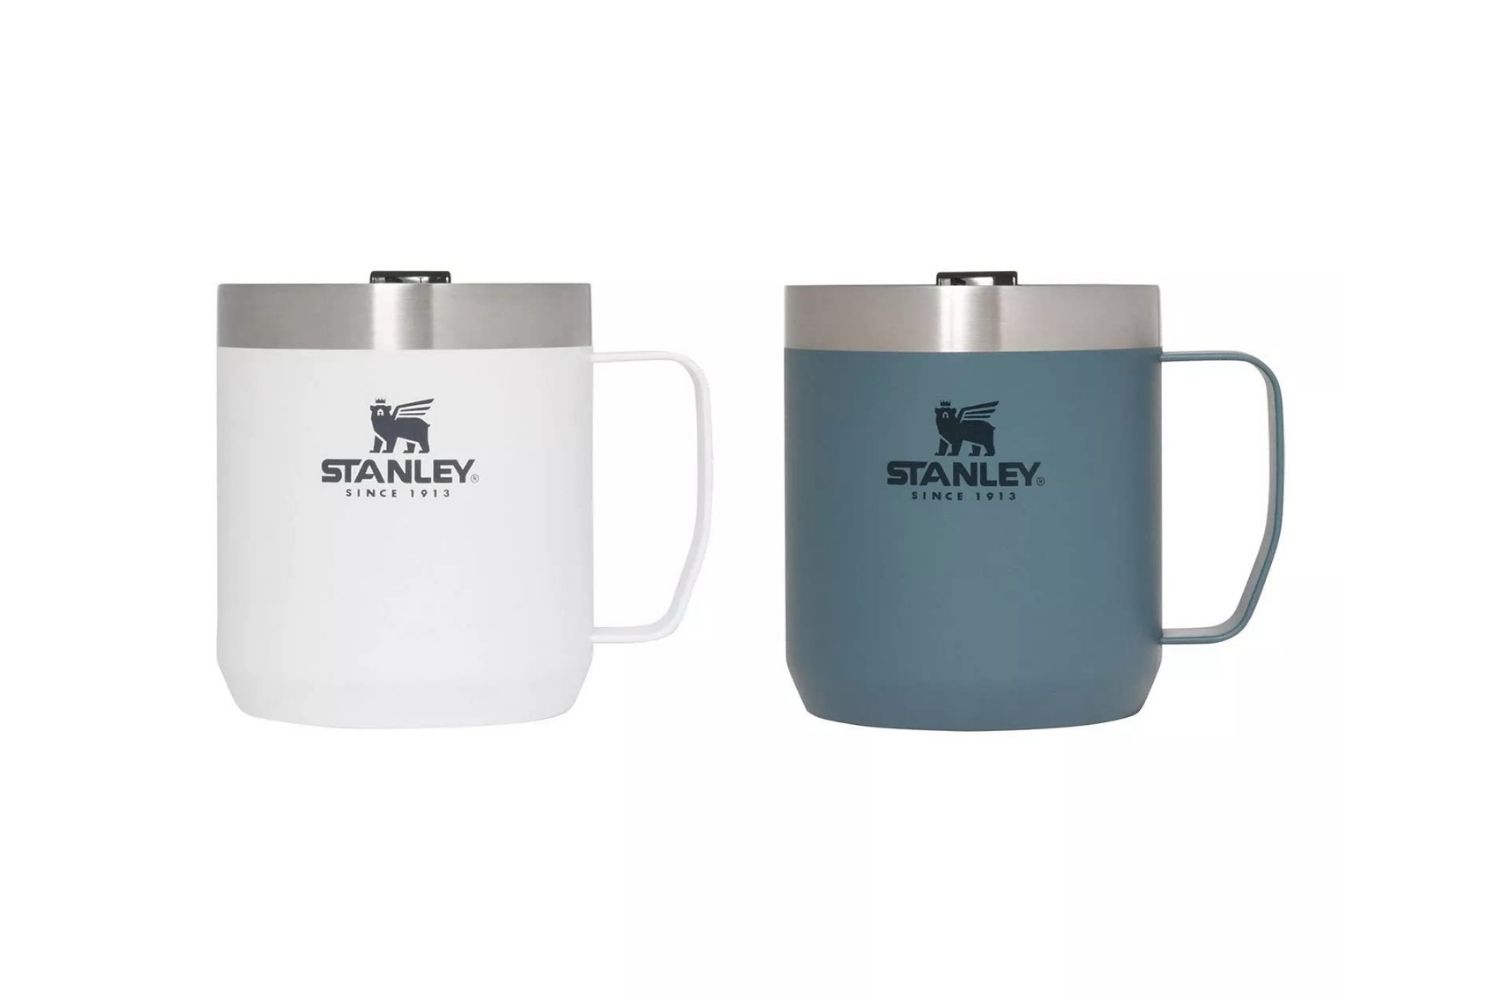 17-surprising-facts-about-stanley-mug